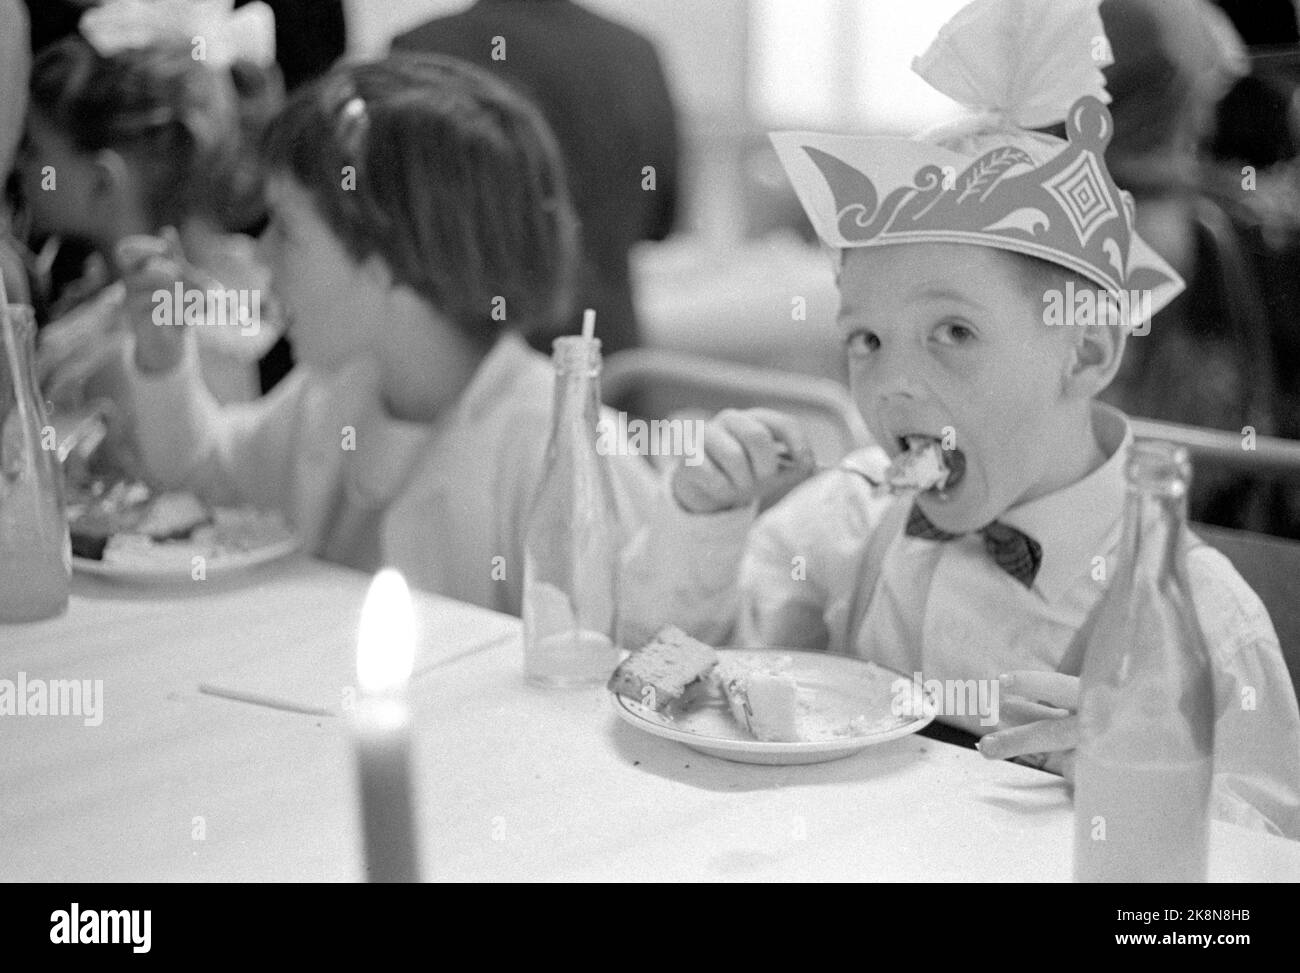 Oslo 19601128 Chanukka lasts until Easter. The Chanukka party has begun - Jewish light party. For eight days, the Jews last last. From the celebration in the synagogue in the Mosaic religious community in Oslo. This year's big event is the children's party that takes place once during Chanukka. It wakes paper hats, soft drinks, cakes and large bags of candy. Photo: Sverre A. Børretzen / Current / NTB Stock Photo